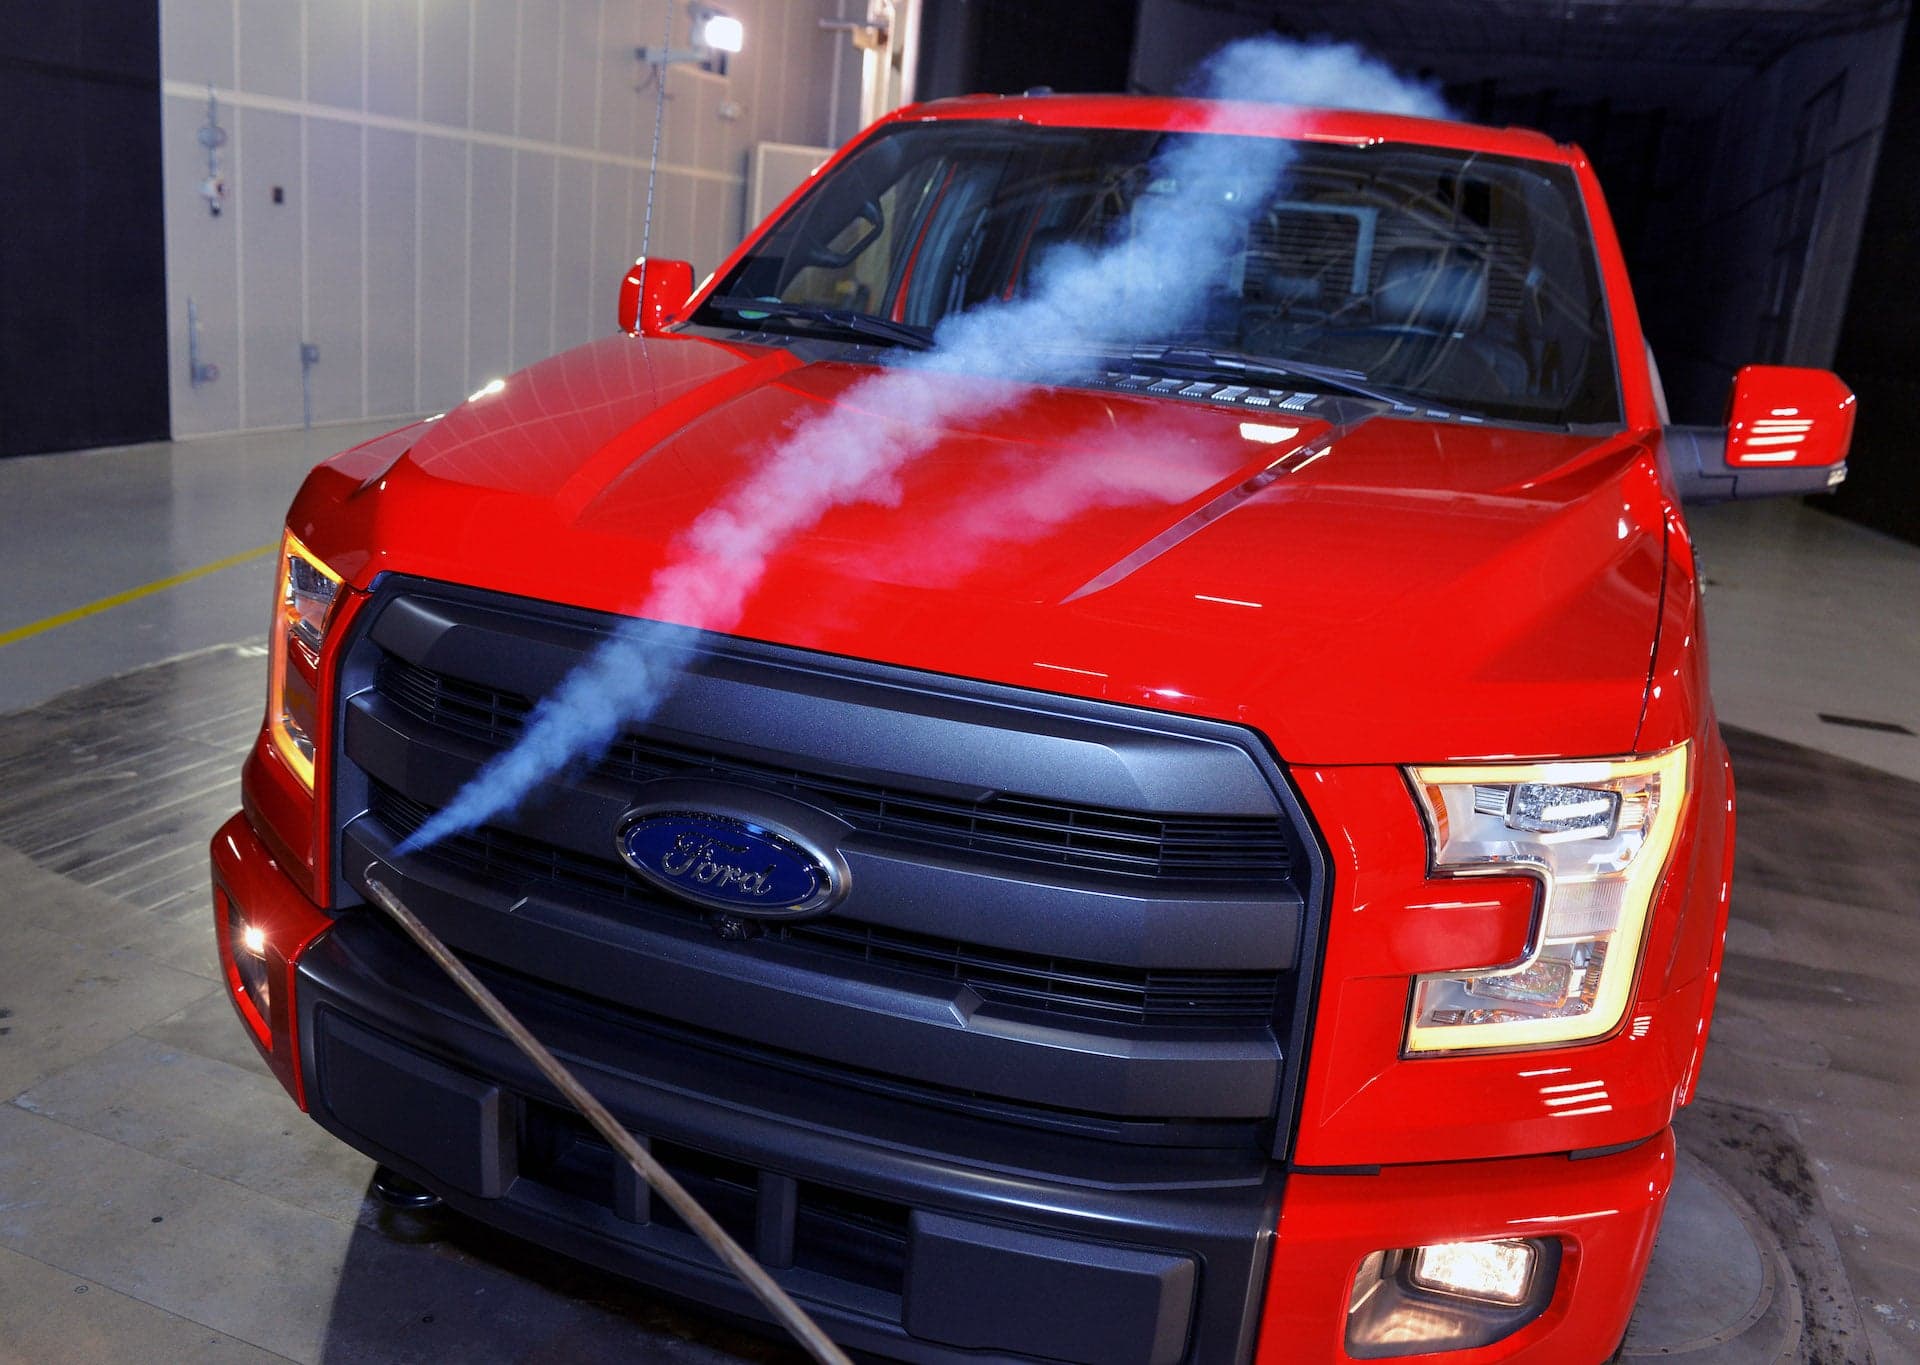 Ford Invests $200 Million in New Wind Tunnel Facility